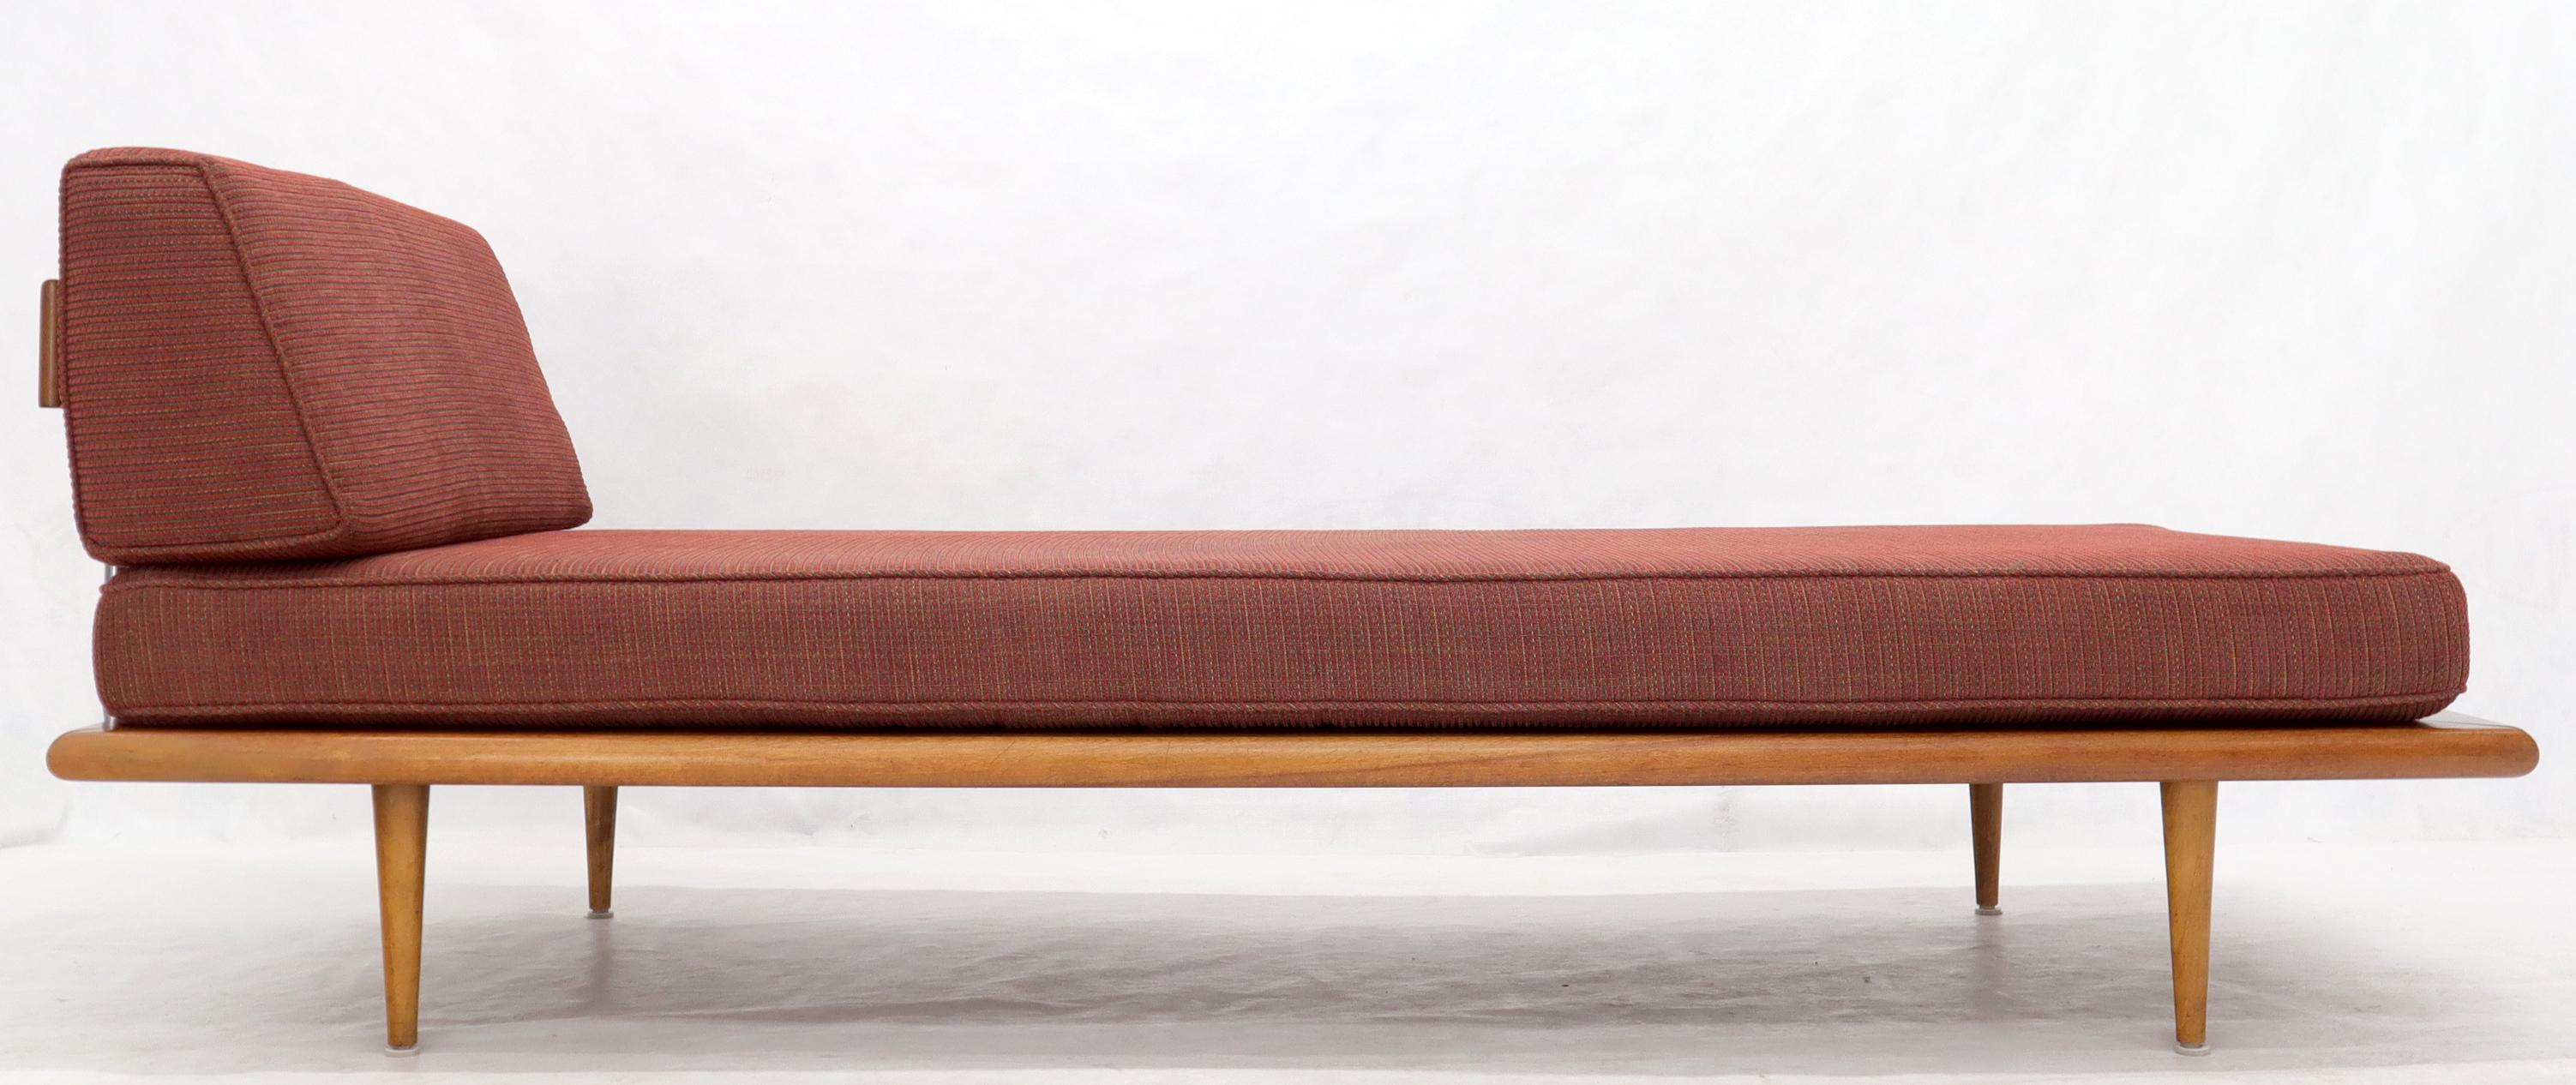 Maple Vintage George Nelson for Herman Miller Daybed Cot Sofa Chaise Lounge